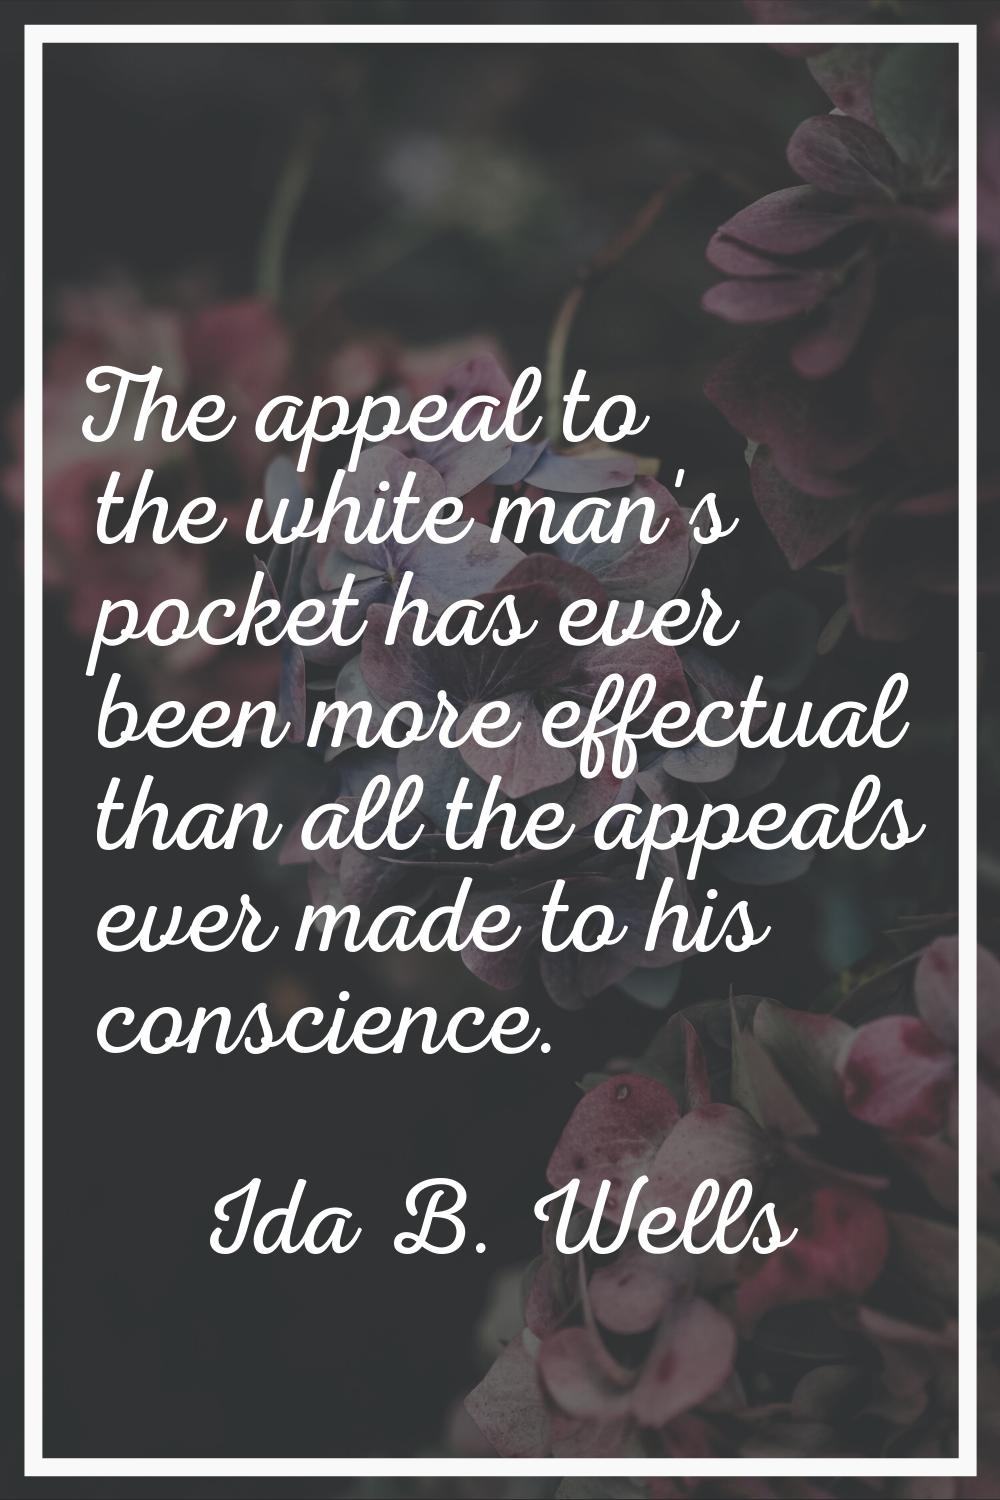 The appeal to the white man's pocket has ever been more effectual than all the appeals ever made to